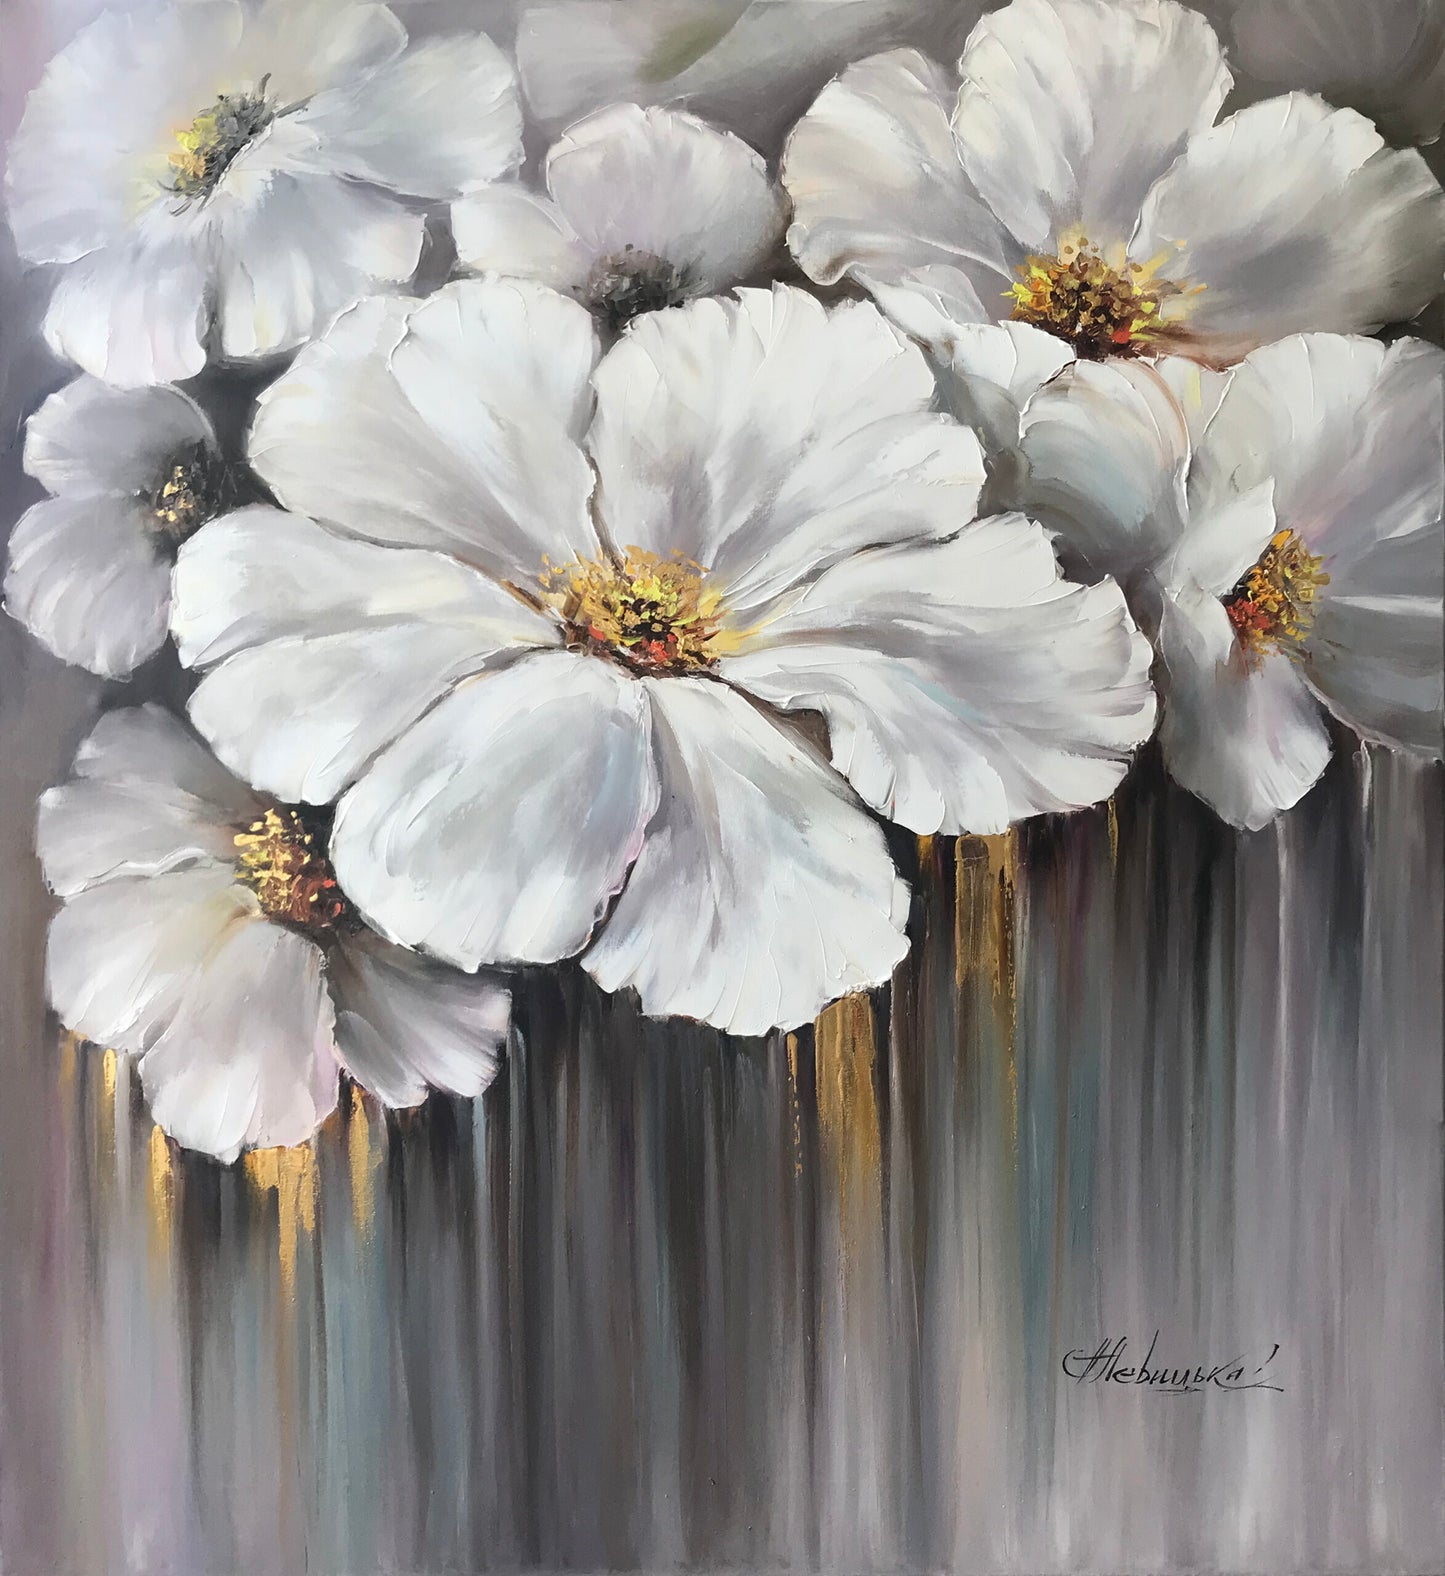 Extra Large White Flowers Painting on Canvas White and Gold Flower Wall Decor Flowers in Bloom Oil Painting